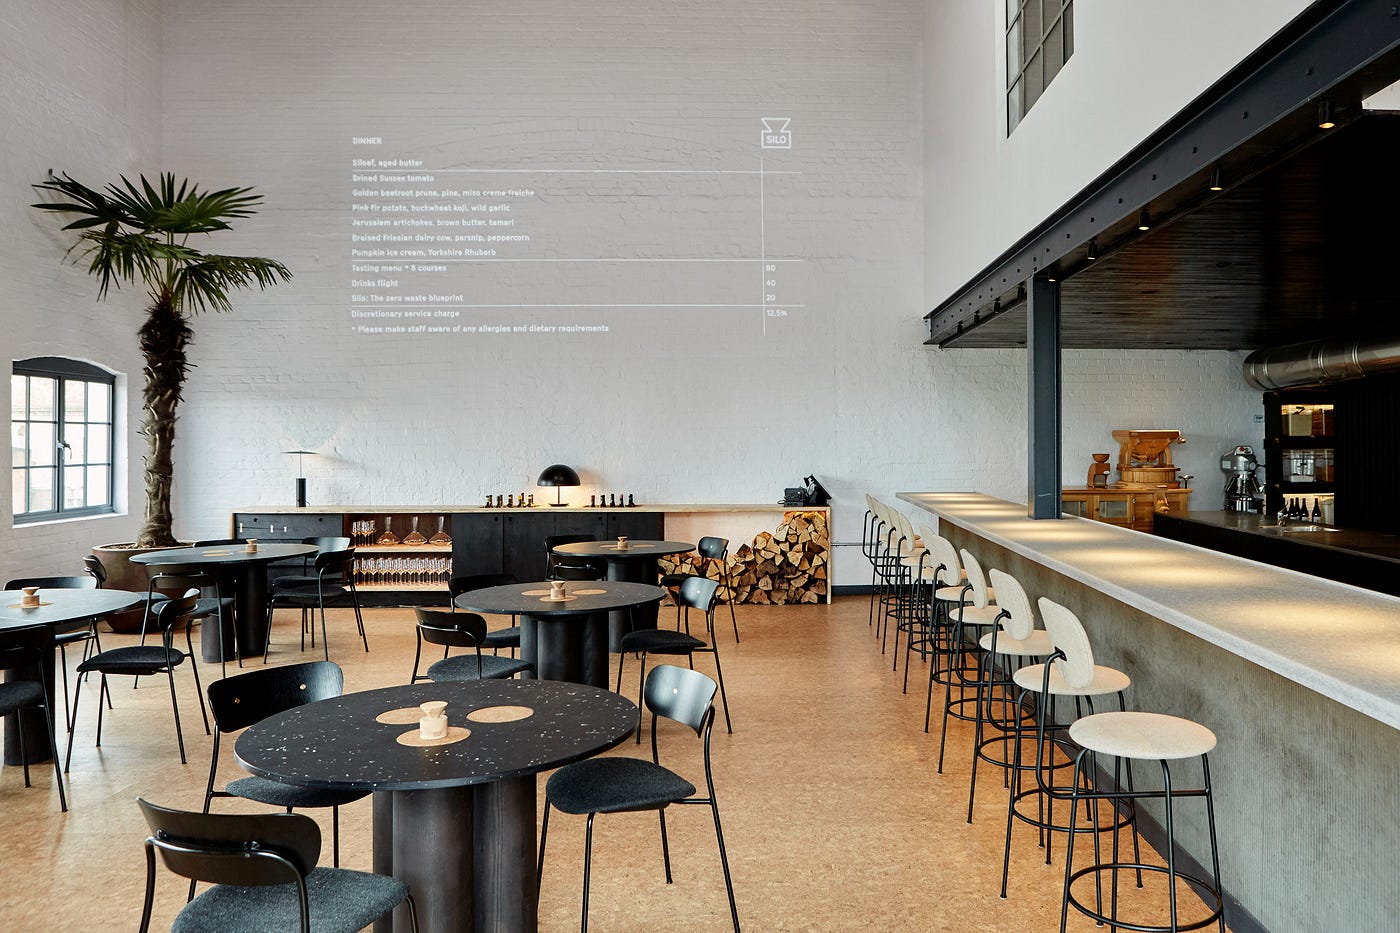 I a room, text is projected on the wall, in front of it there are tables with chairs and on the right side is a long bar.